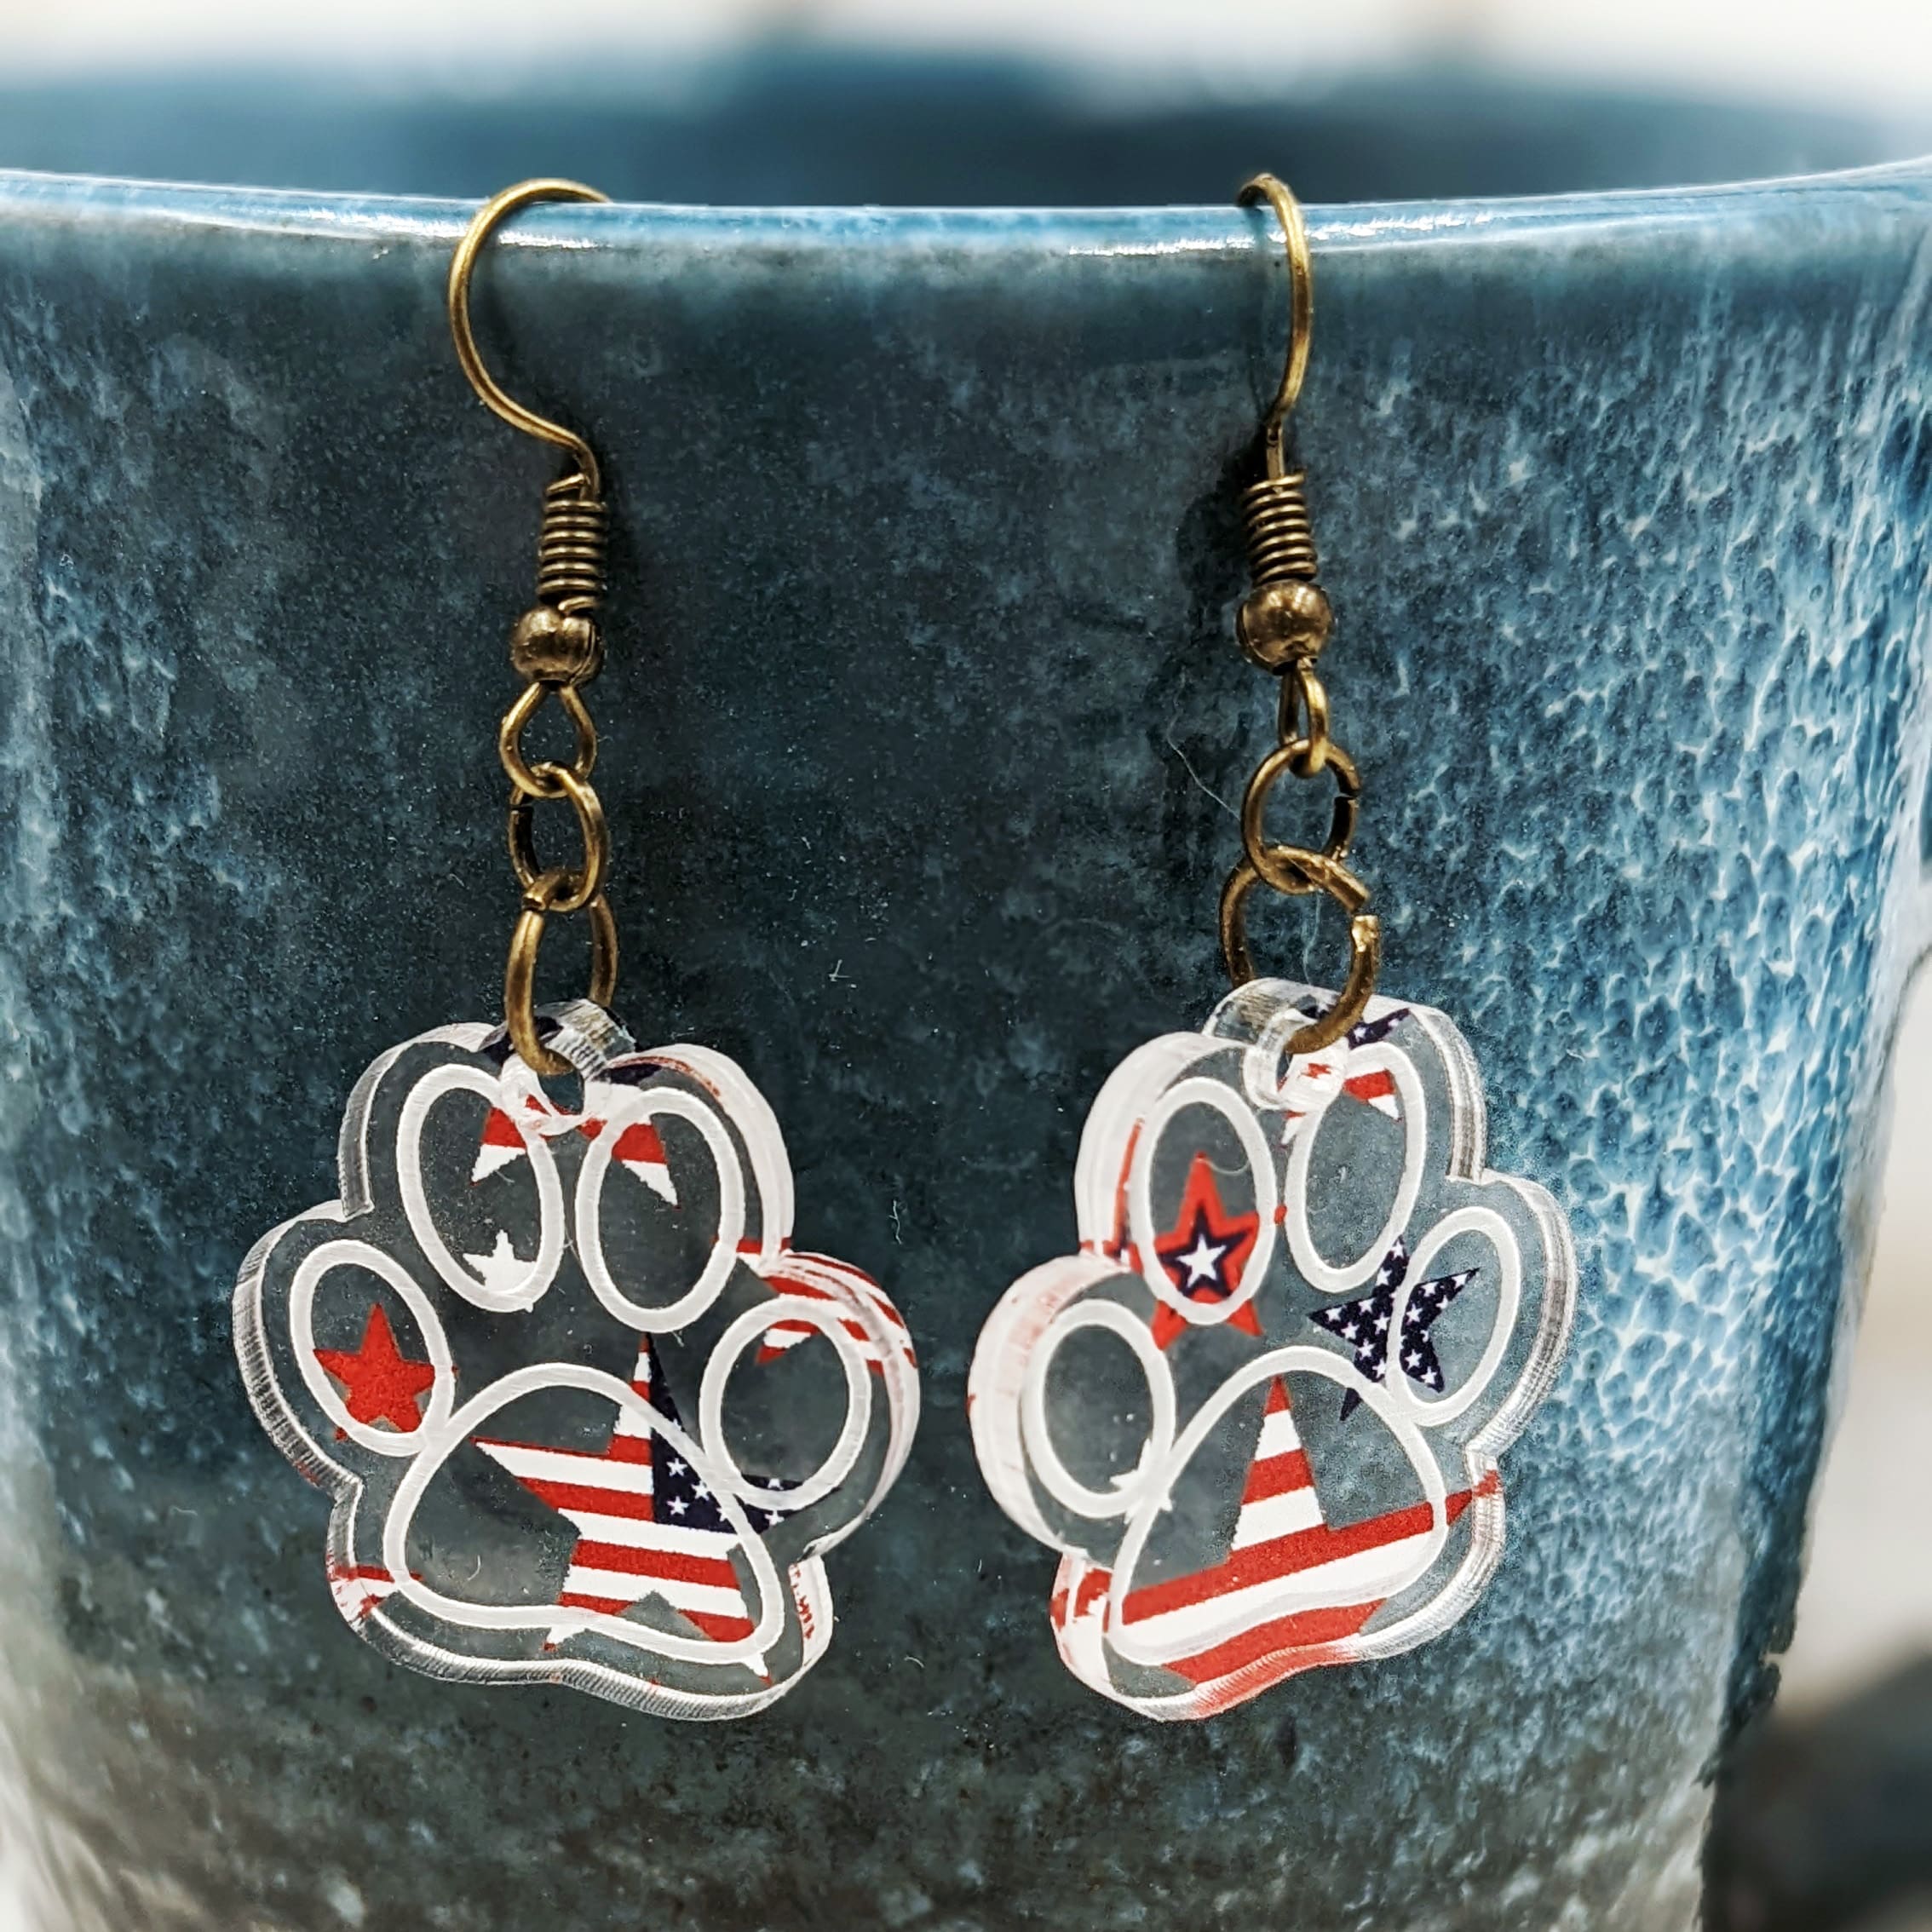 Acrylic patterned stars and stripes etched pawprint-shaped earrings.